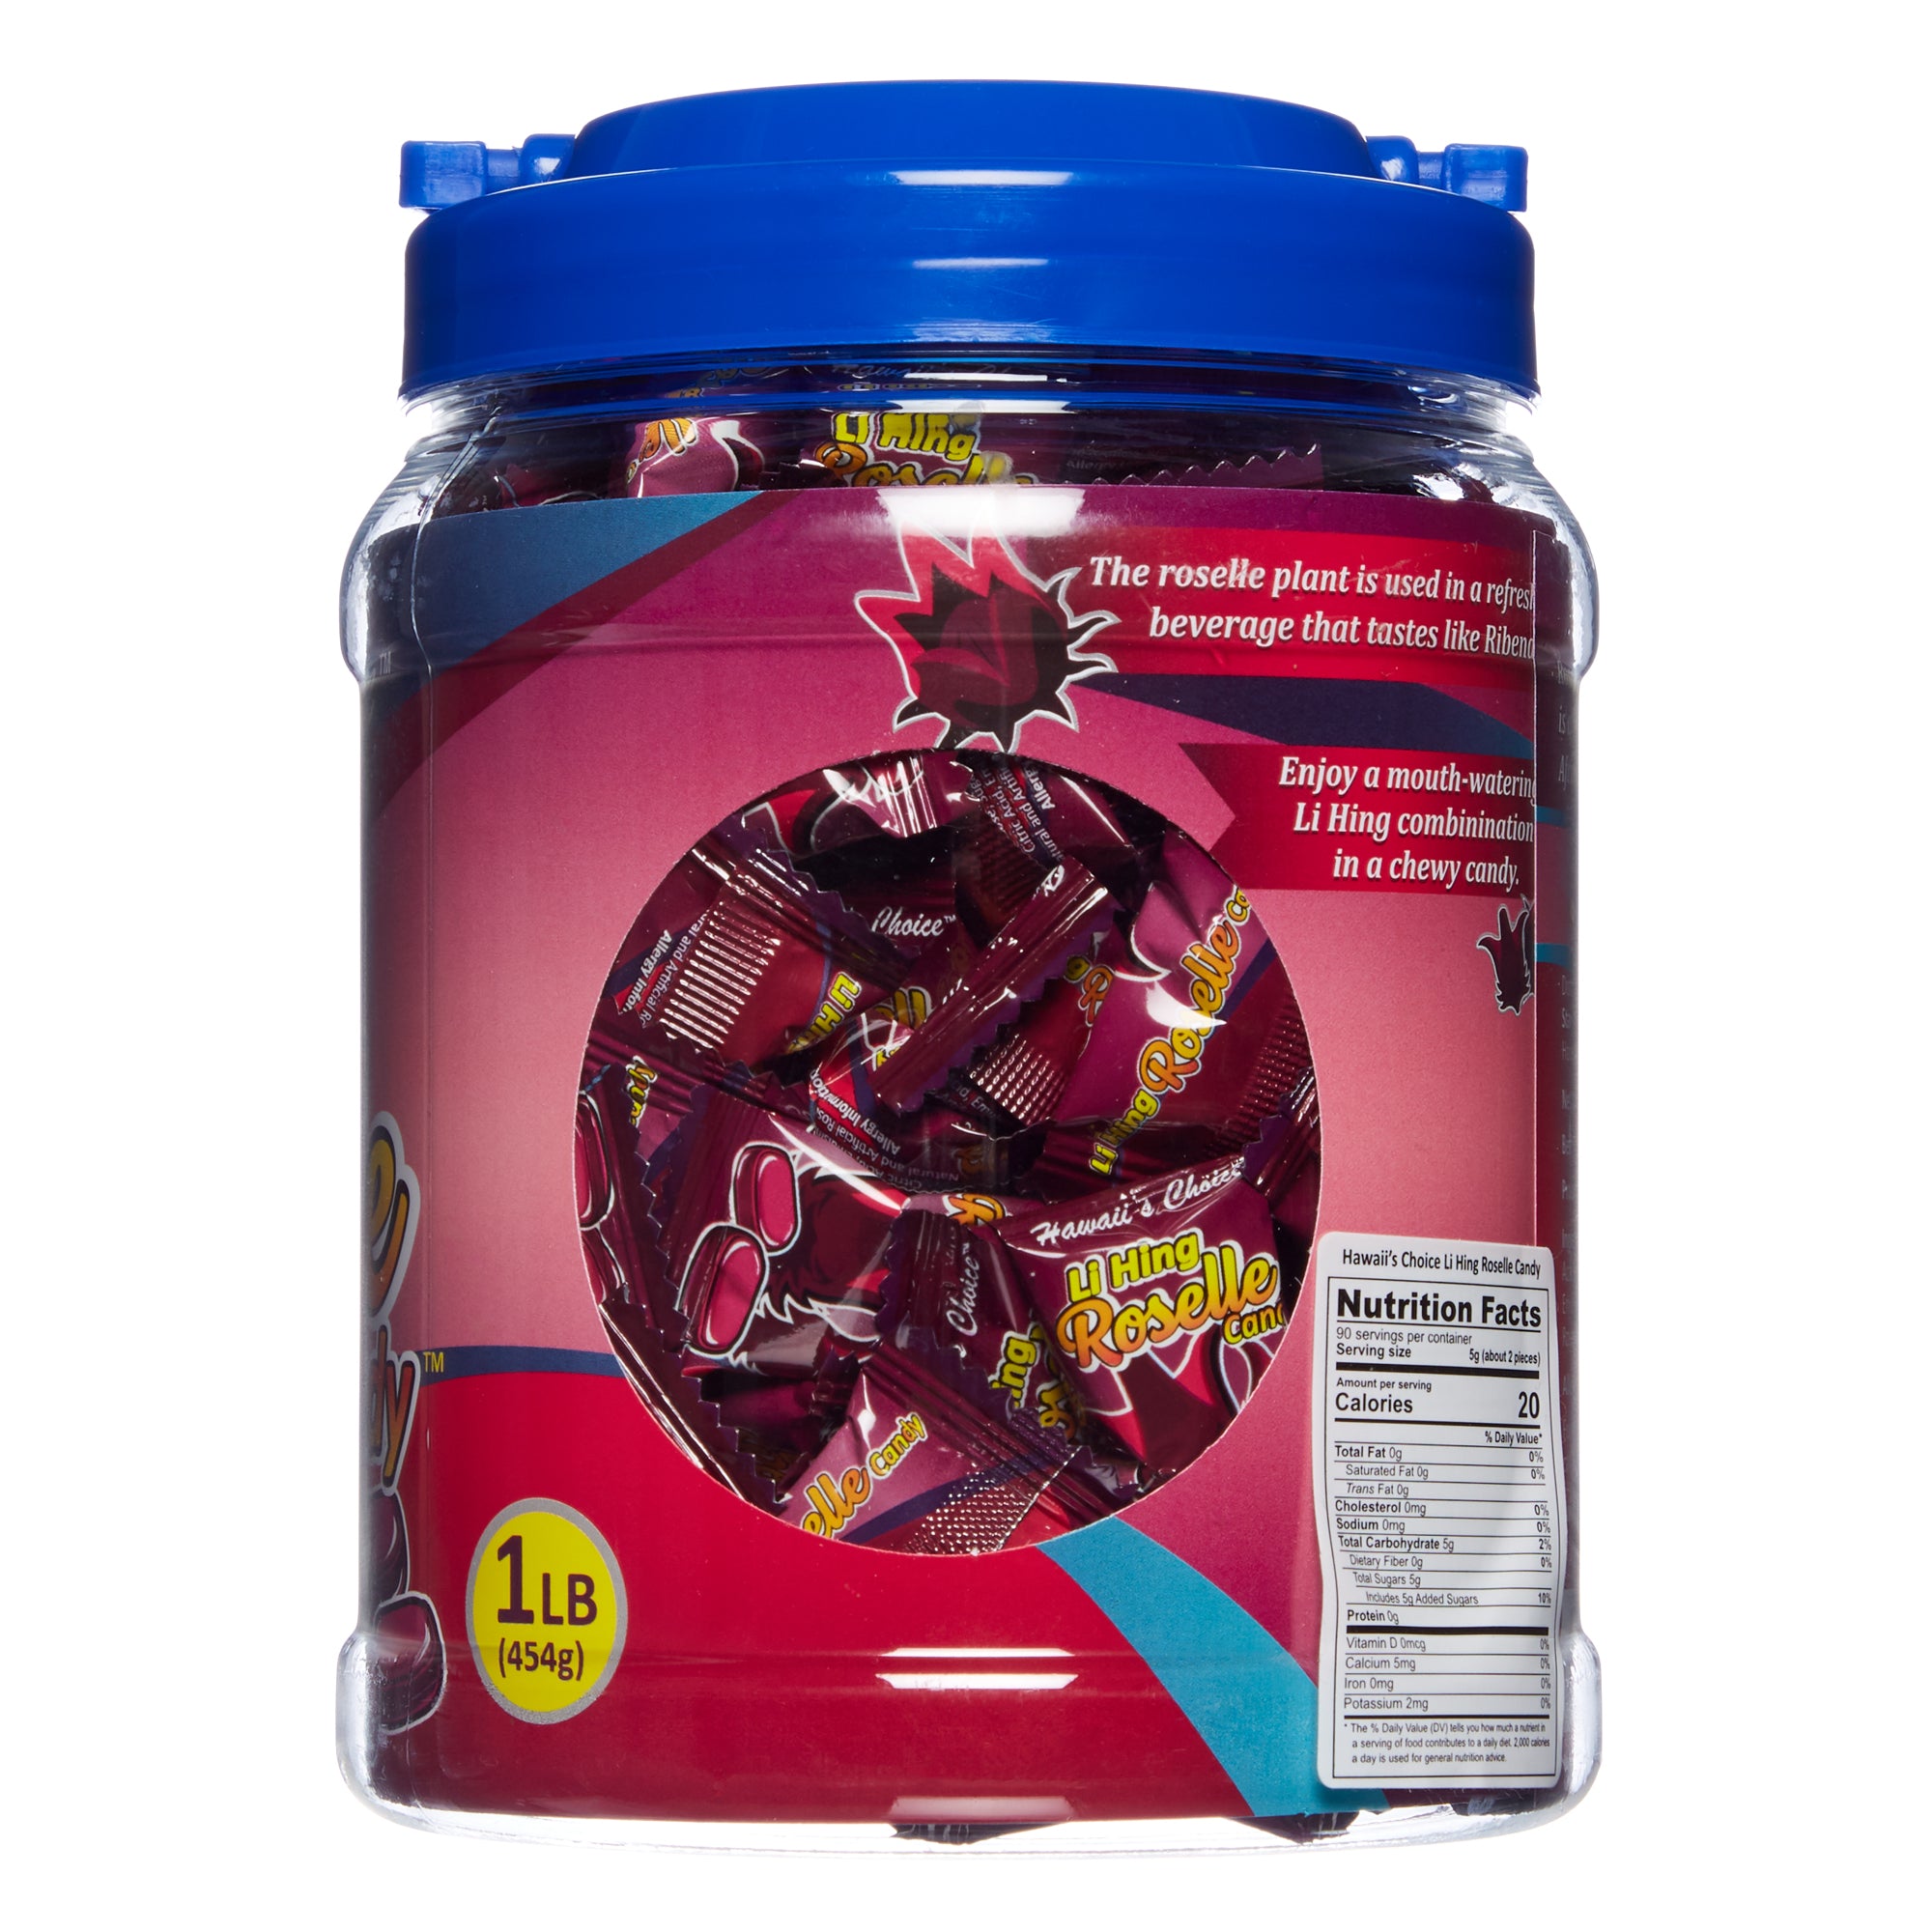 Hawaii's Choice Li Hing Hawaiian Chewy Candy - Dual 1lb Roselle Jars, Individually Wrapped Mouth-Watering Candies - Reg. $19.48/jar, 10% Special@ $17.52/jar (USD)